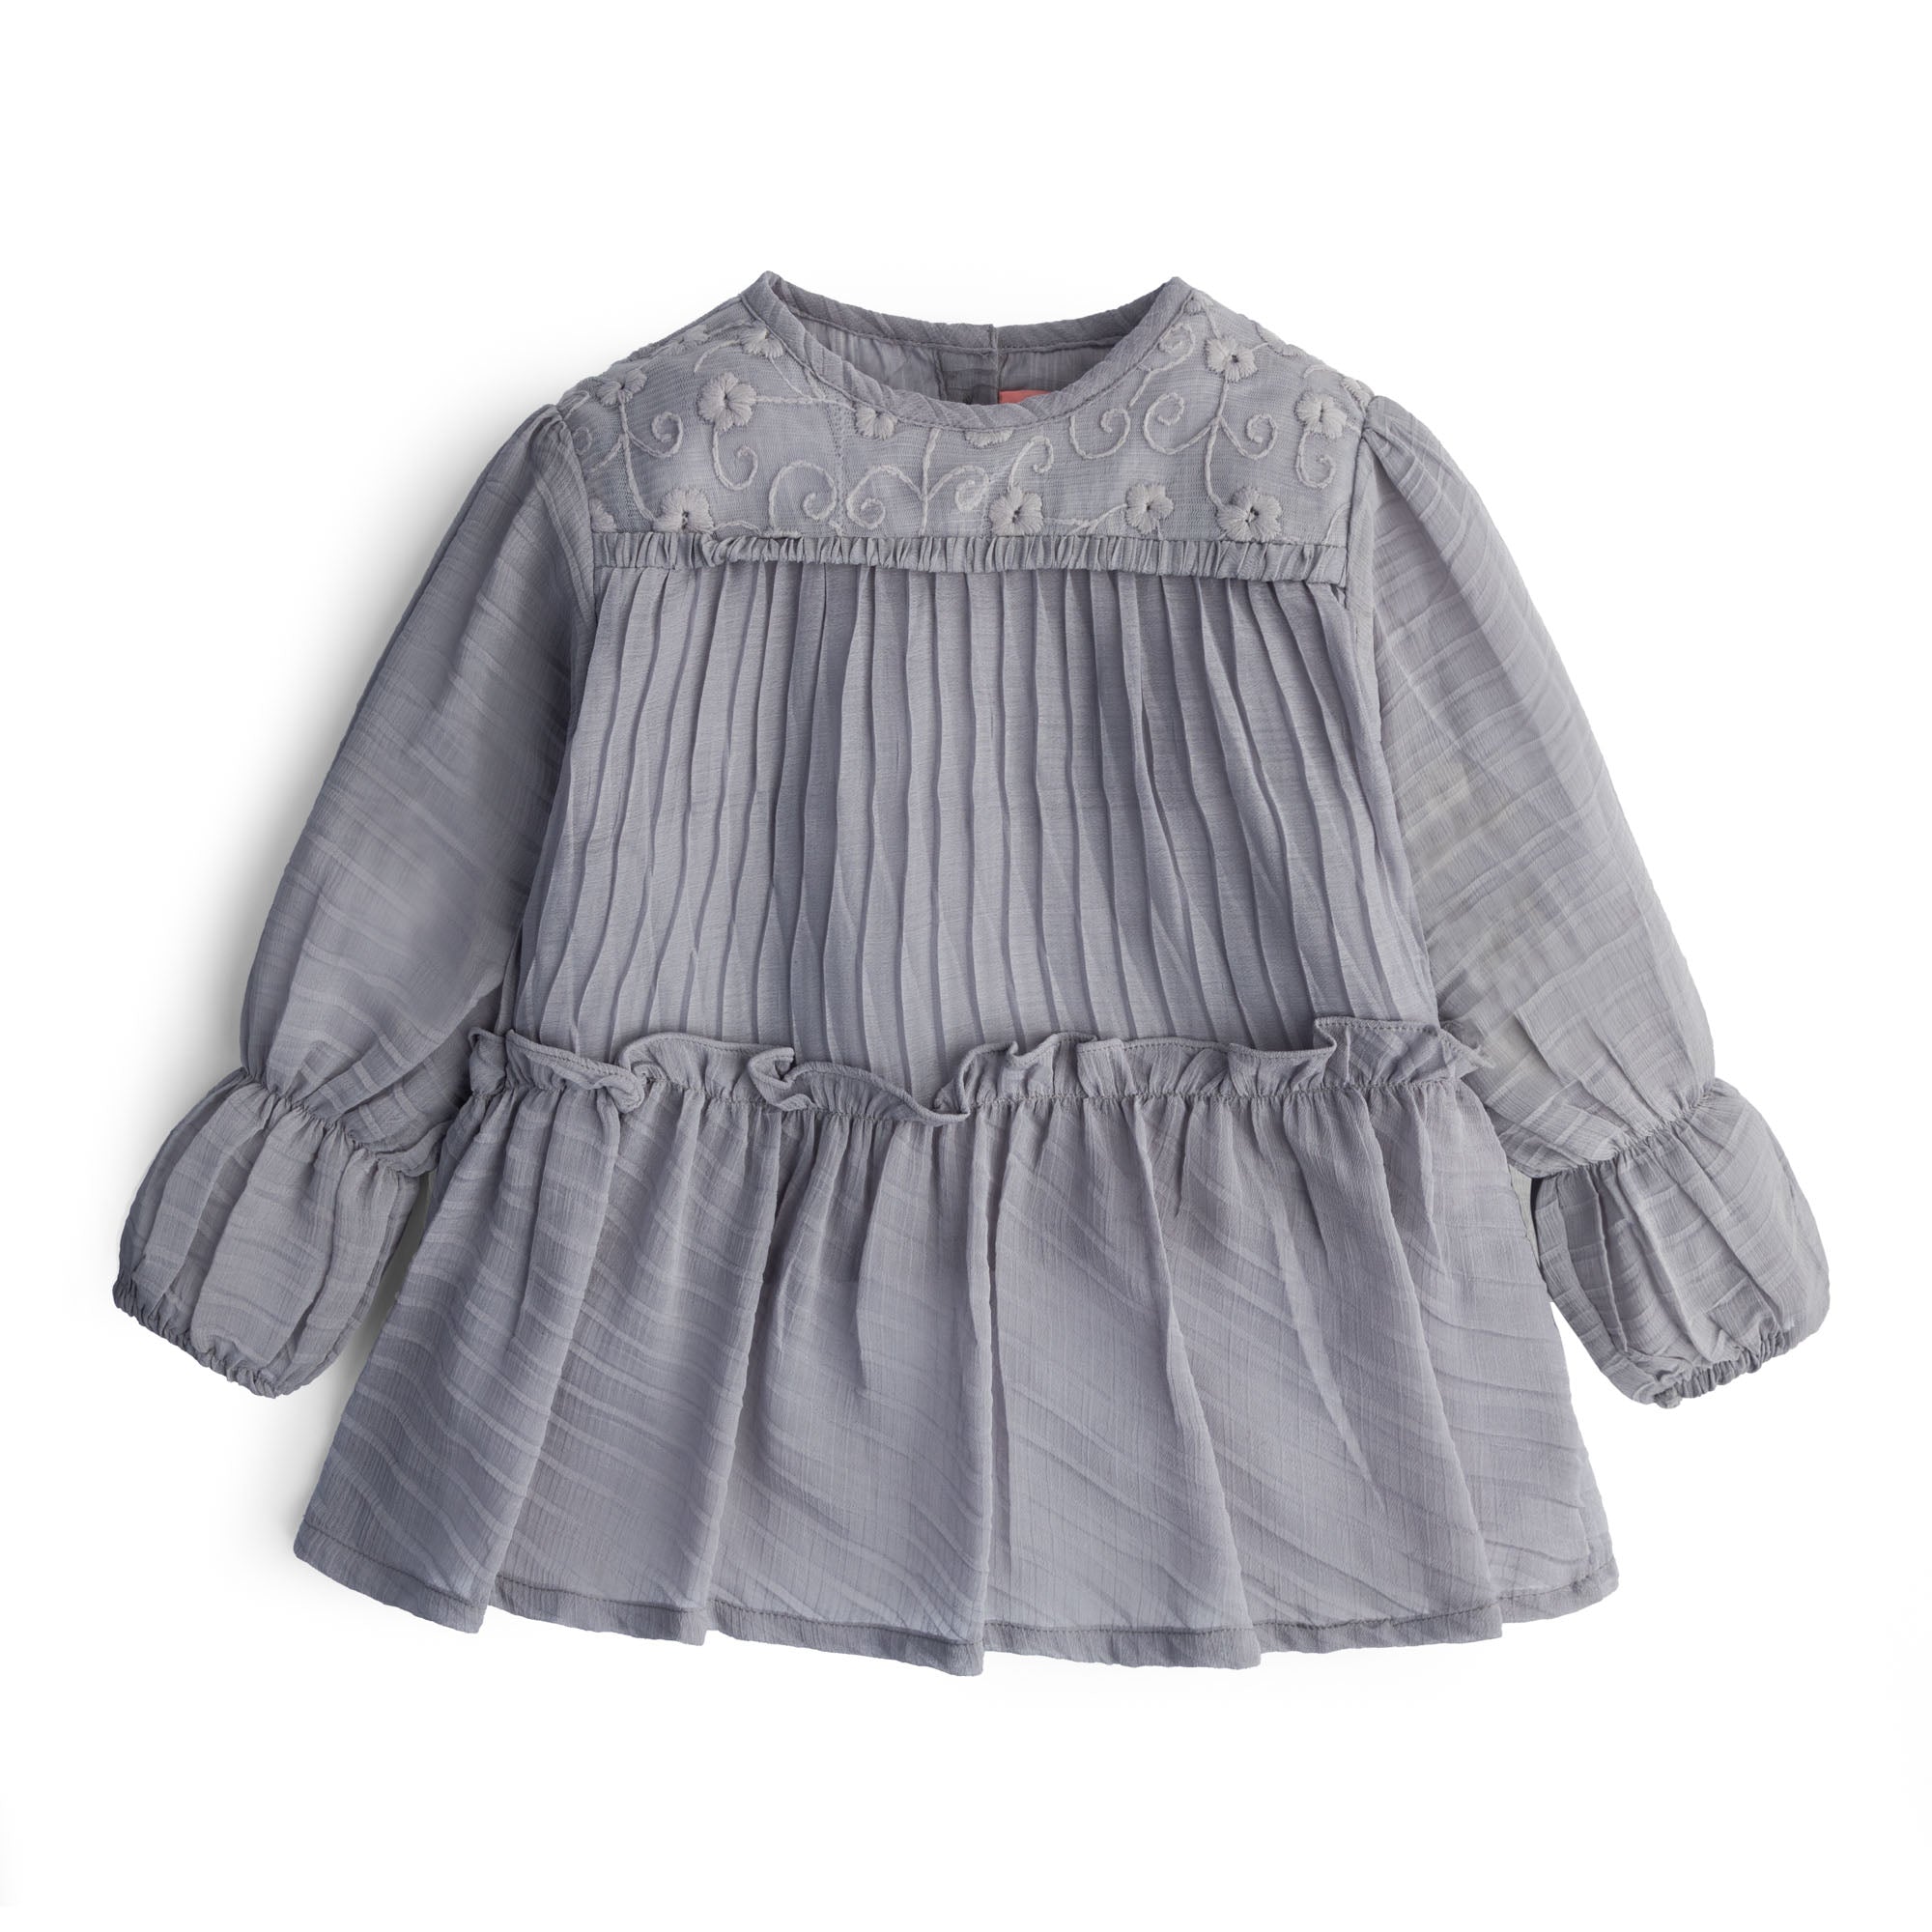 Pleated Grey Embroidered Top